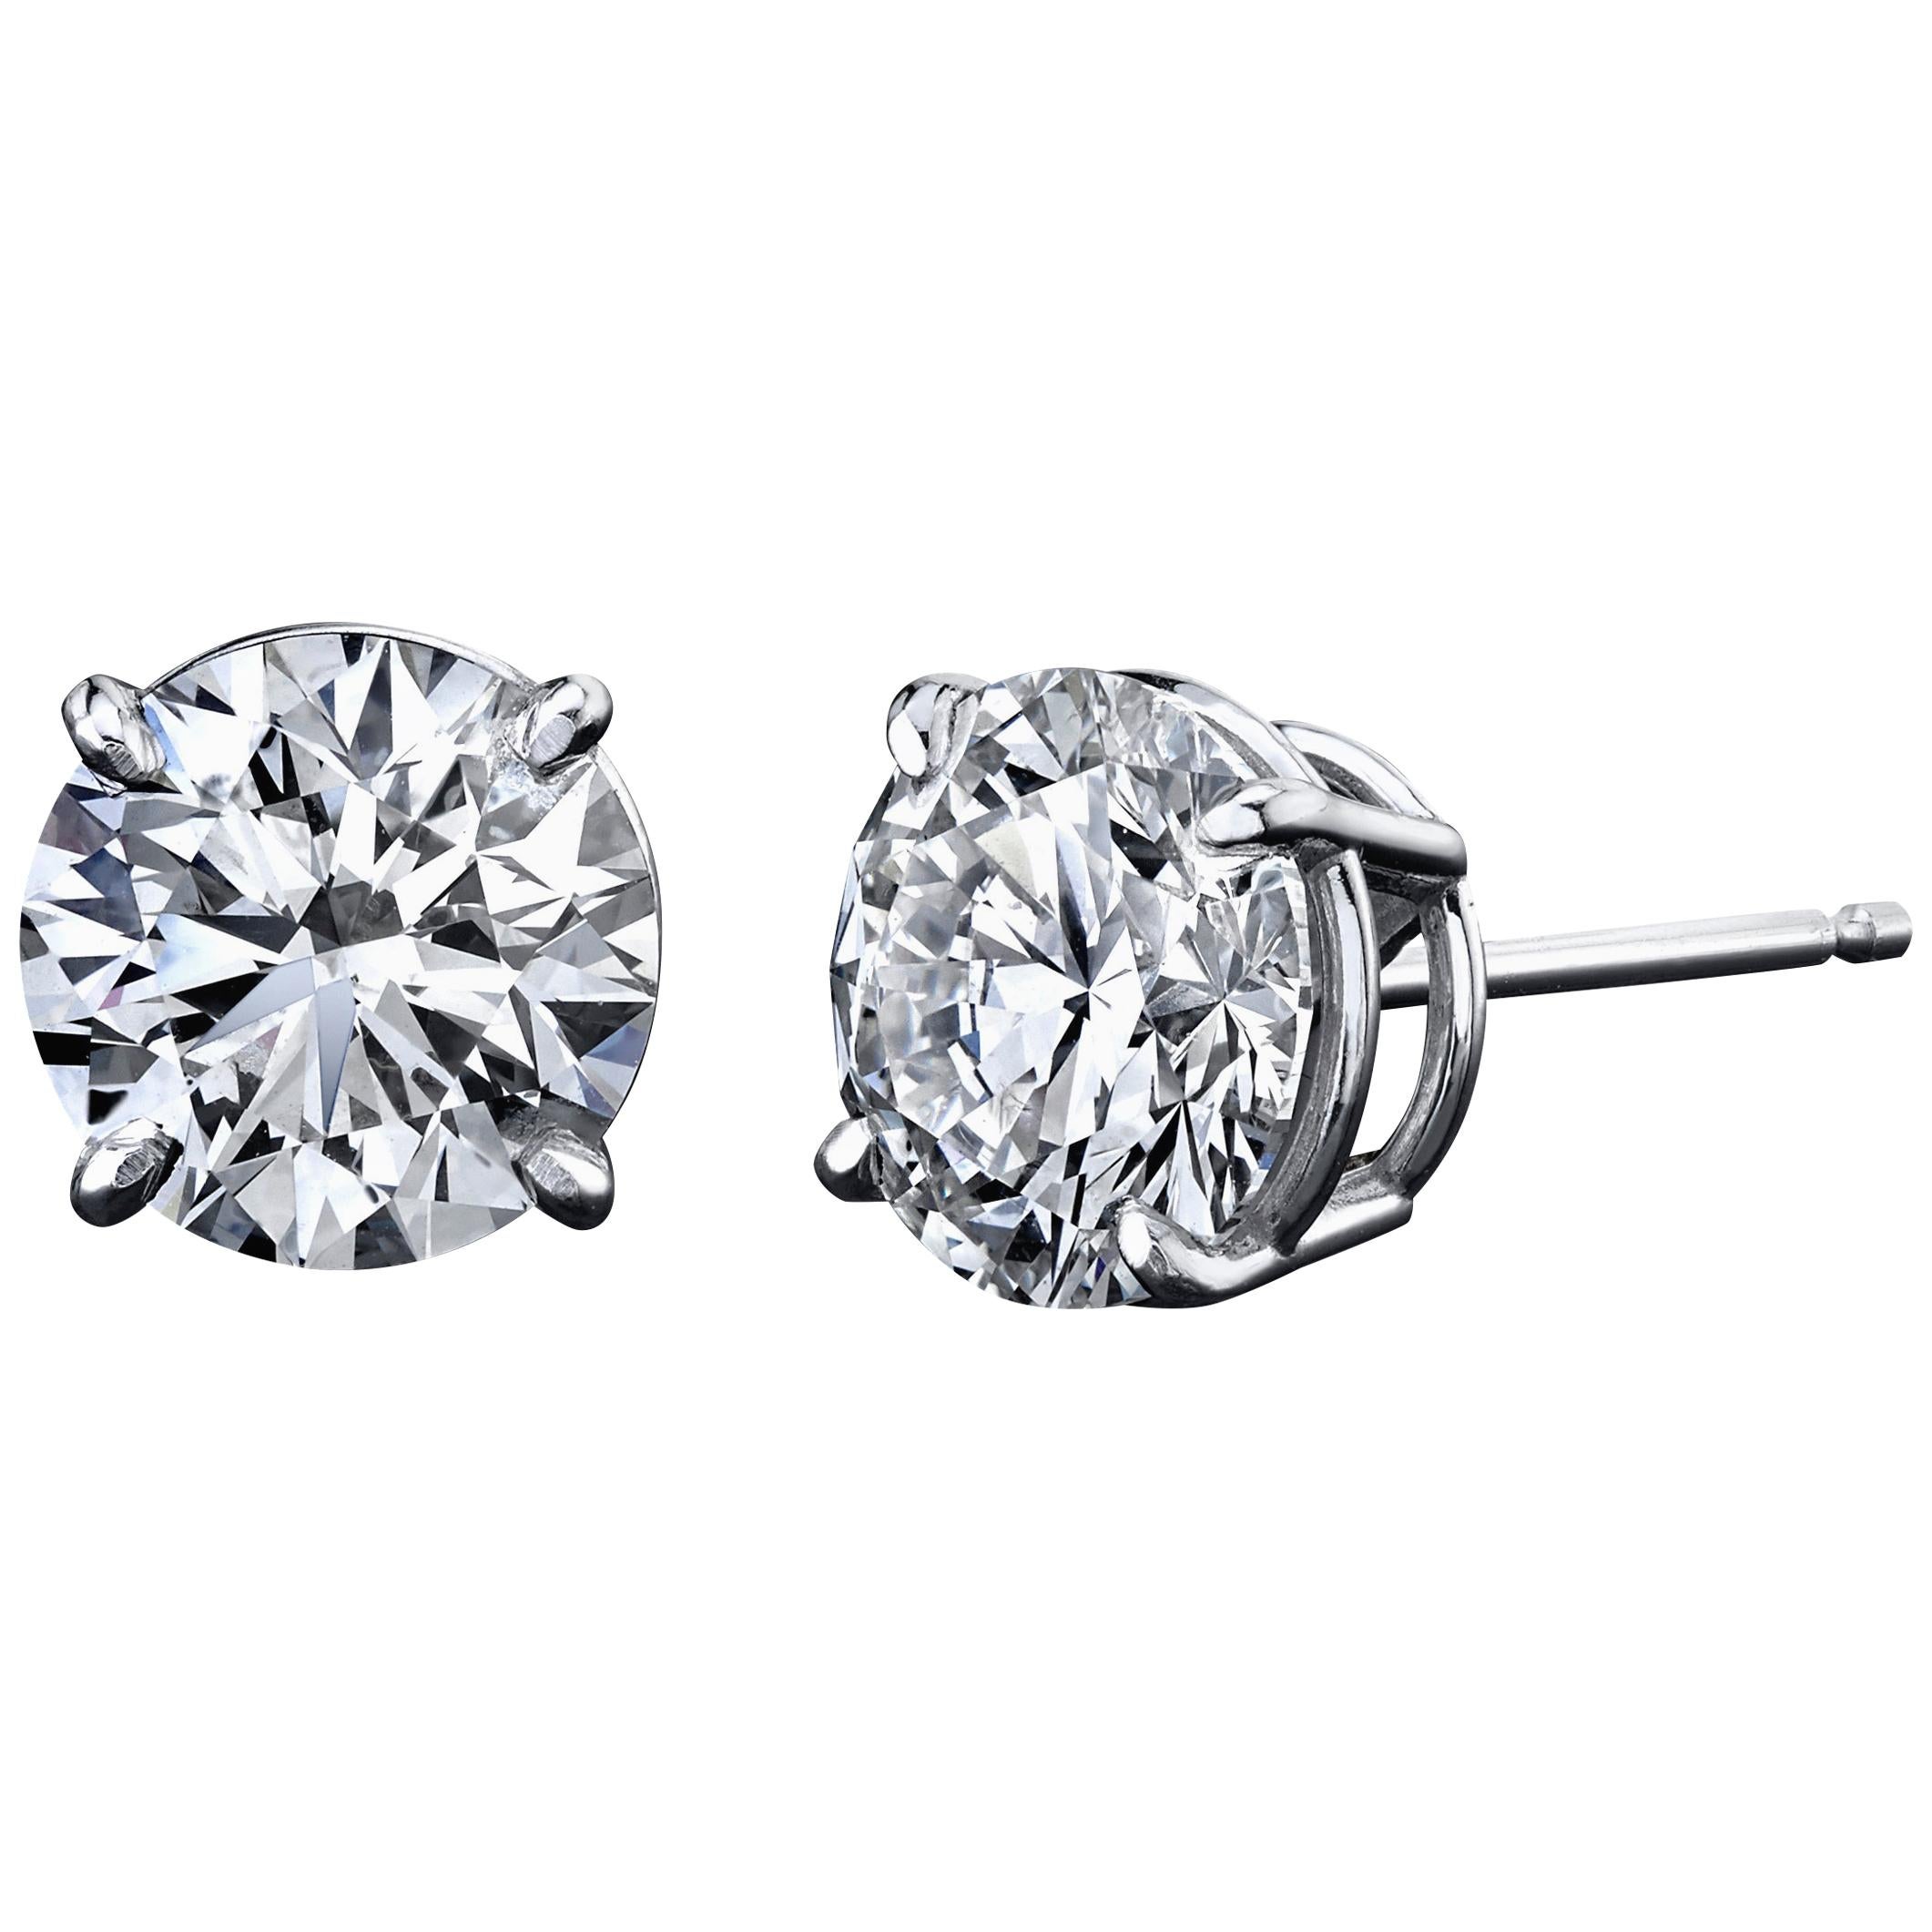 Diamond Stud Earrings 1.00 Carat with GIA Certificates 18K White Gold 4-Prong For Sale